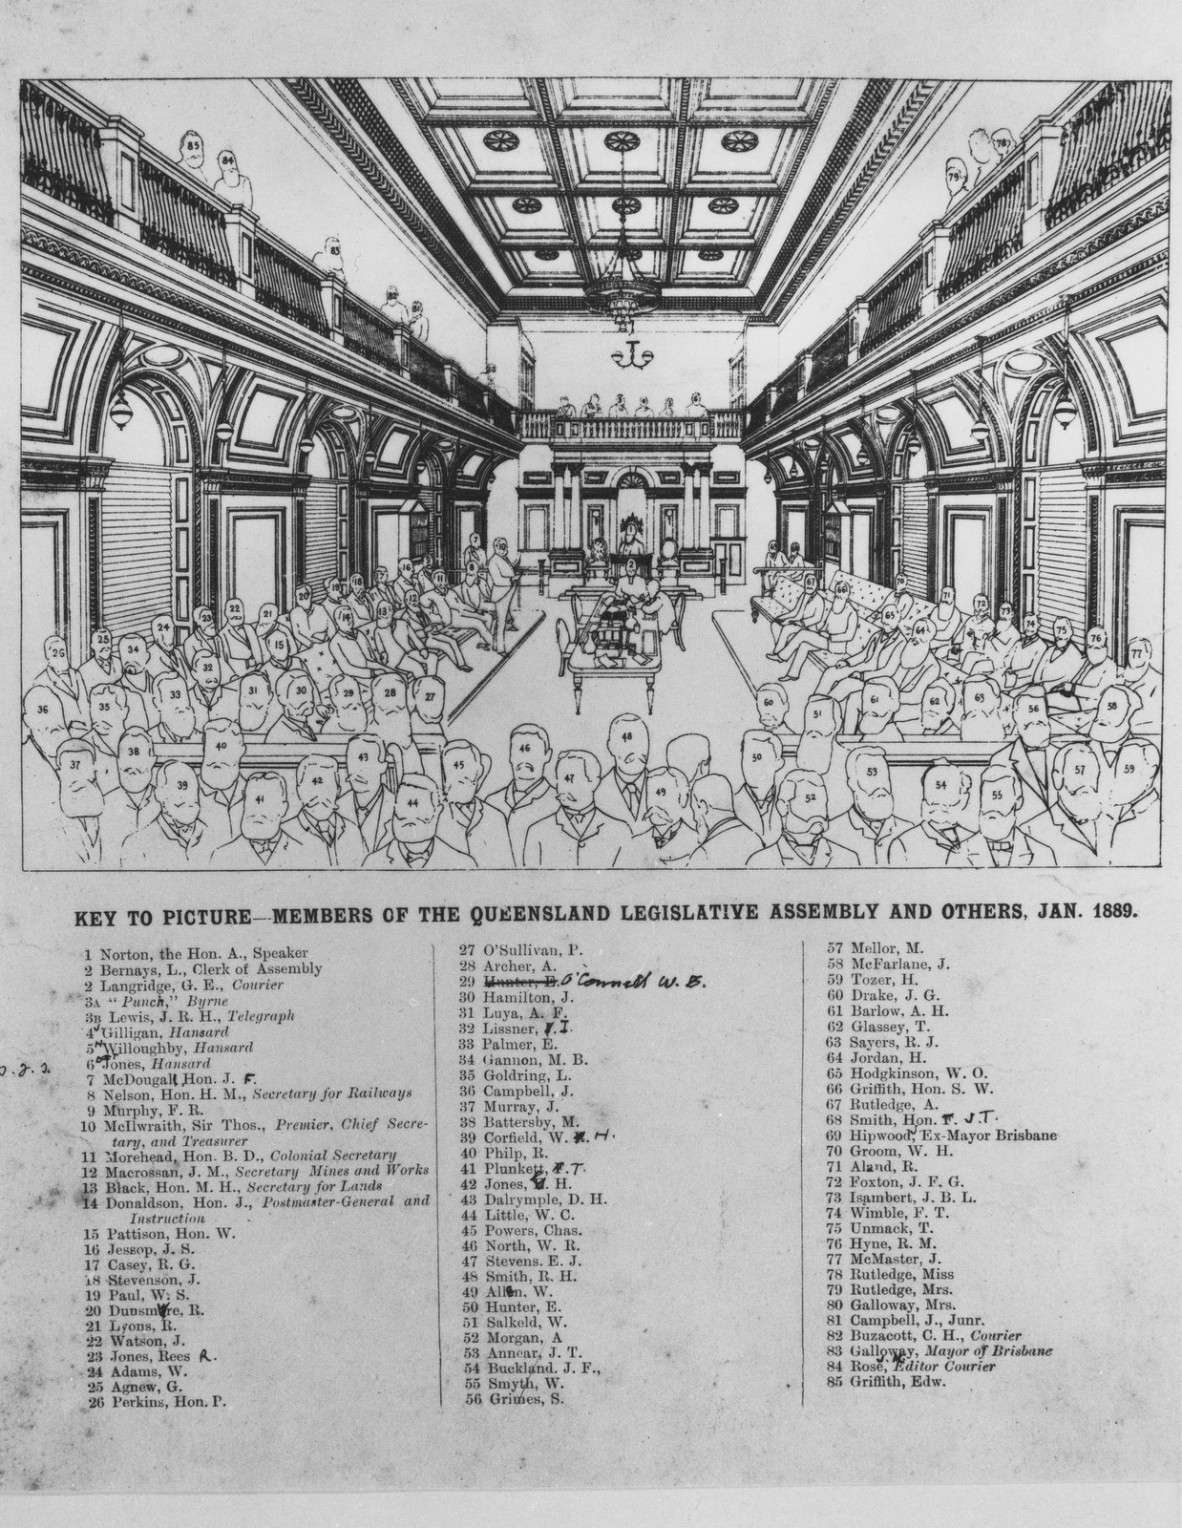 Sketch of members of the Queensland Legislative Assembly in the Parliament